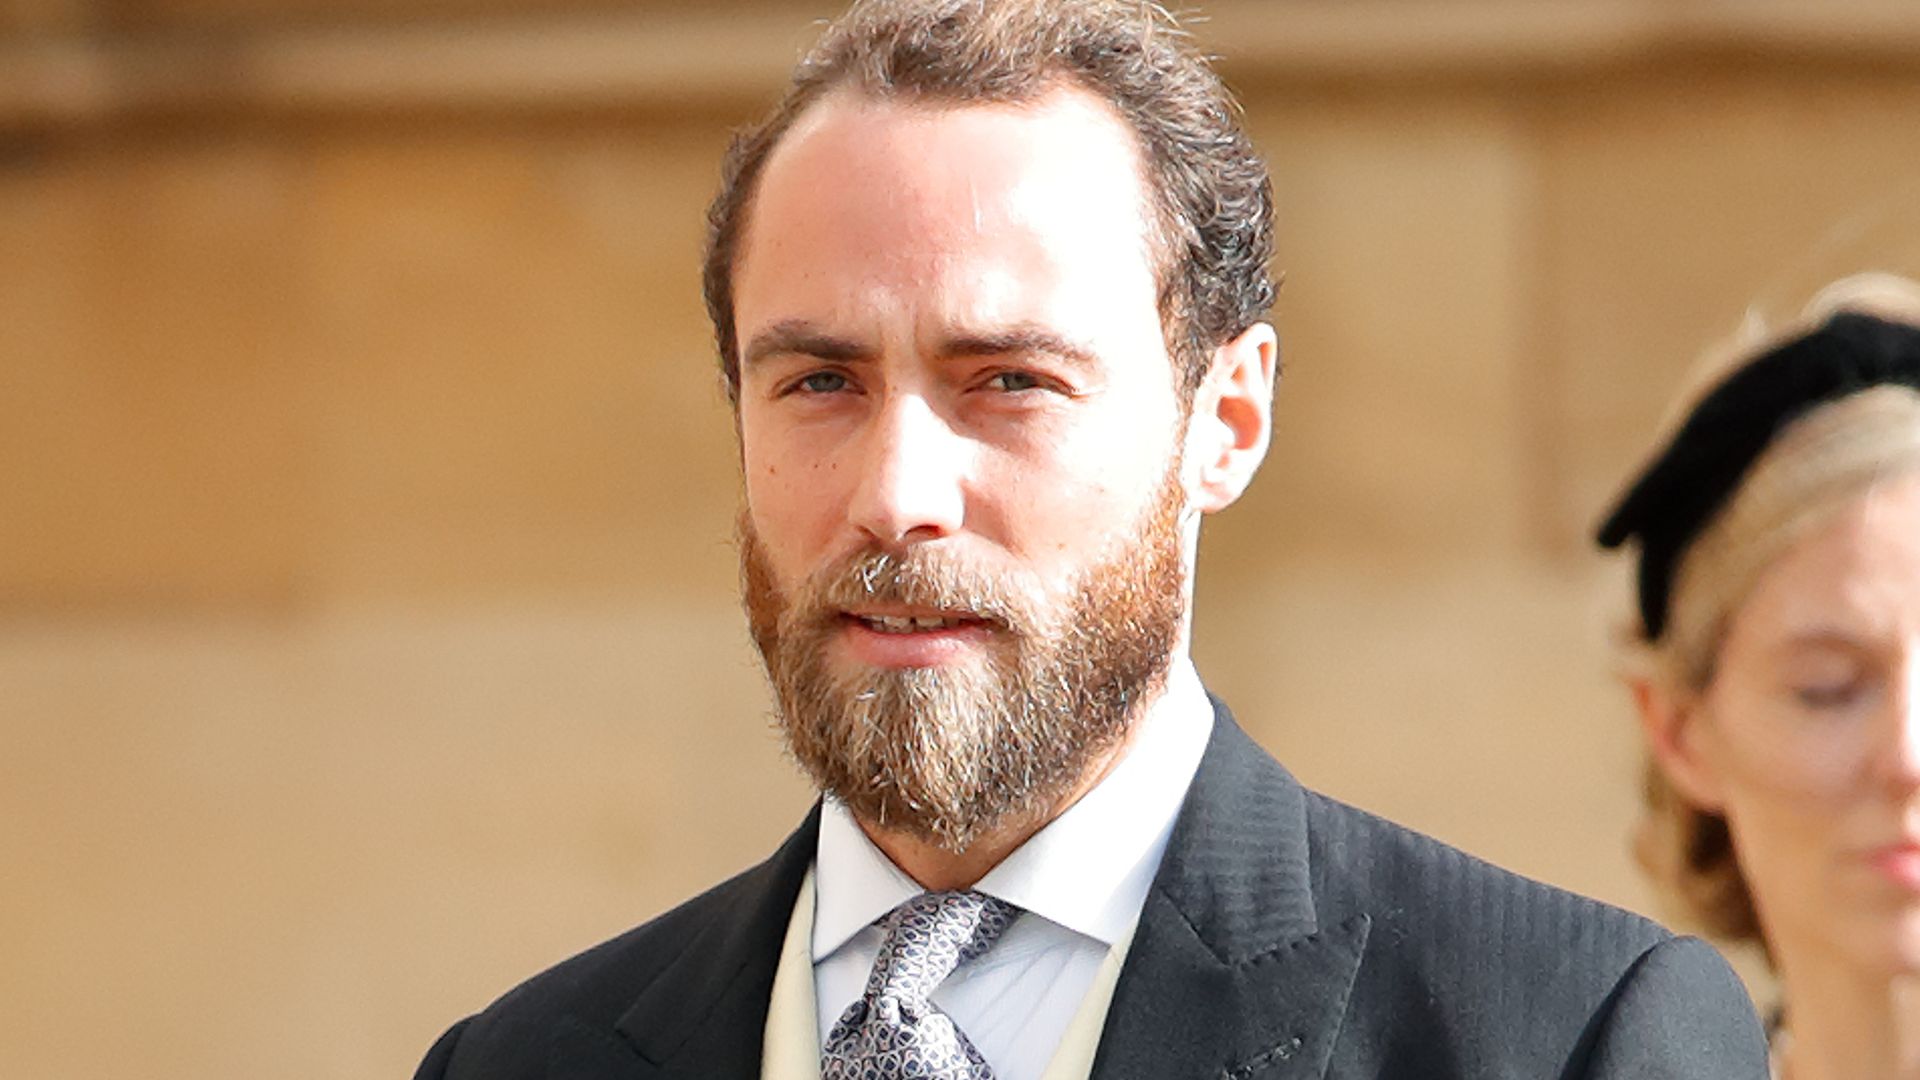 James Middleton breaks silence over feud with neighbour who put up ‘malicious posters’ about his parents